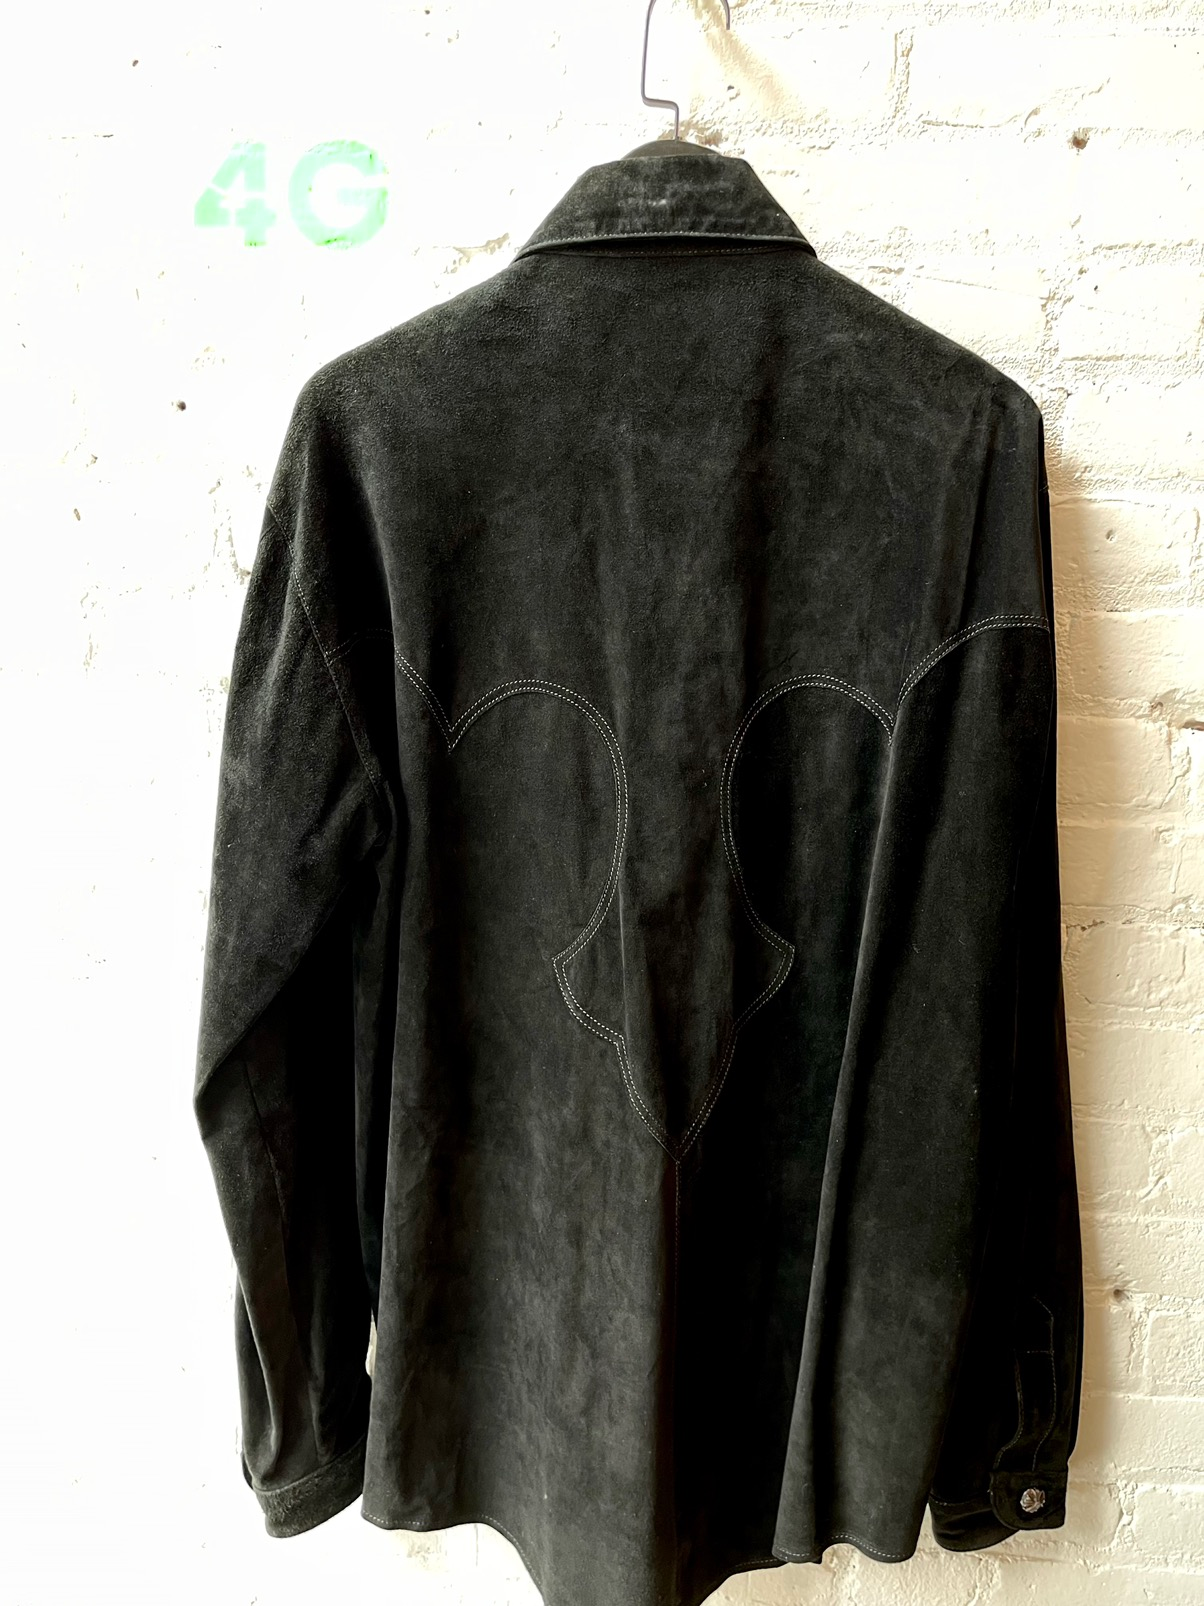 Chrome Hearts Black Suede Leather Jacket Shirt XL 4Gseller